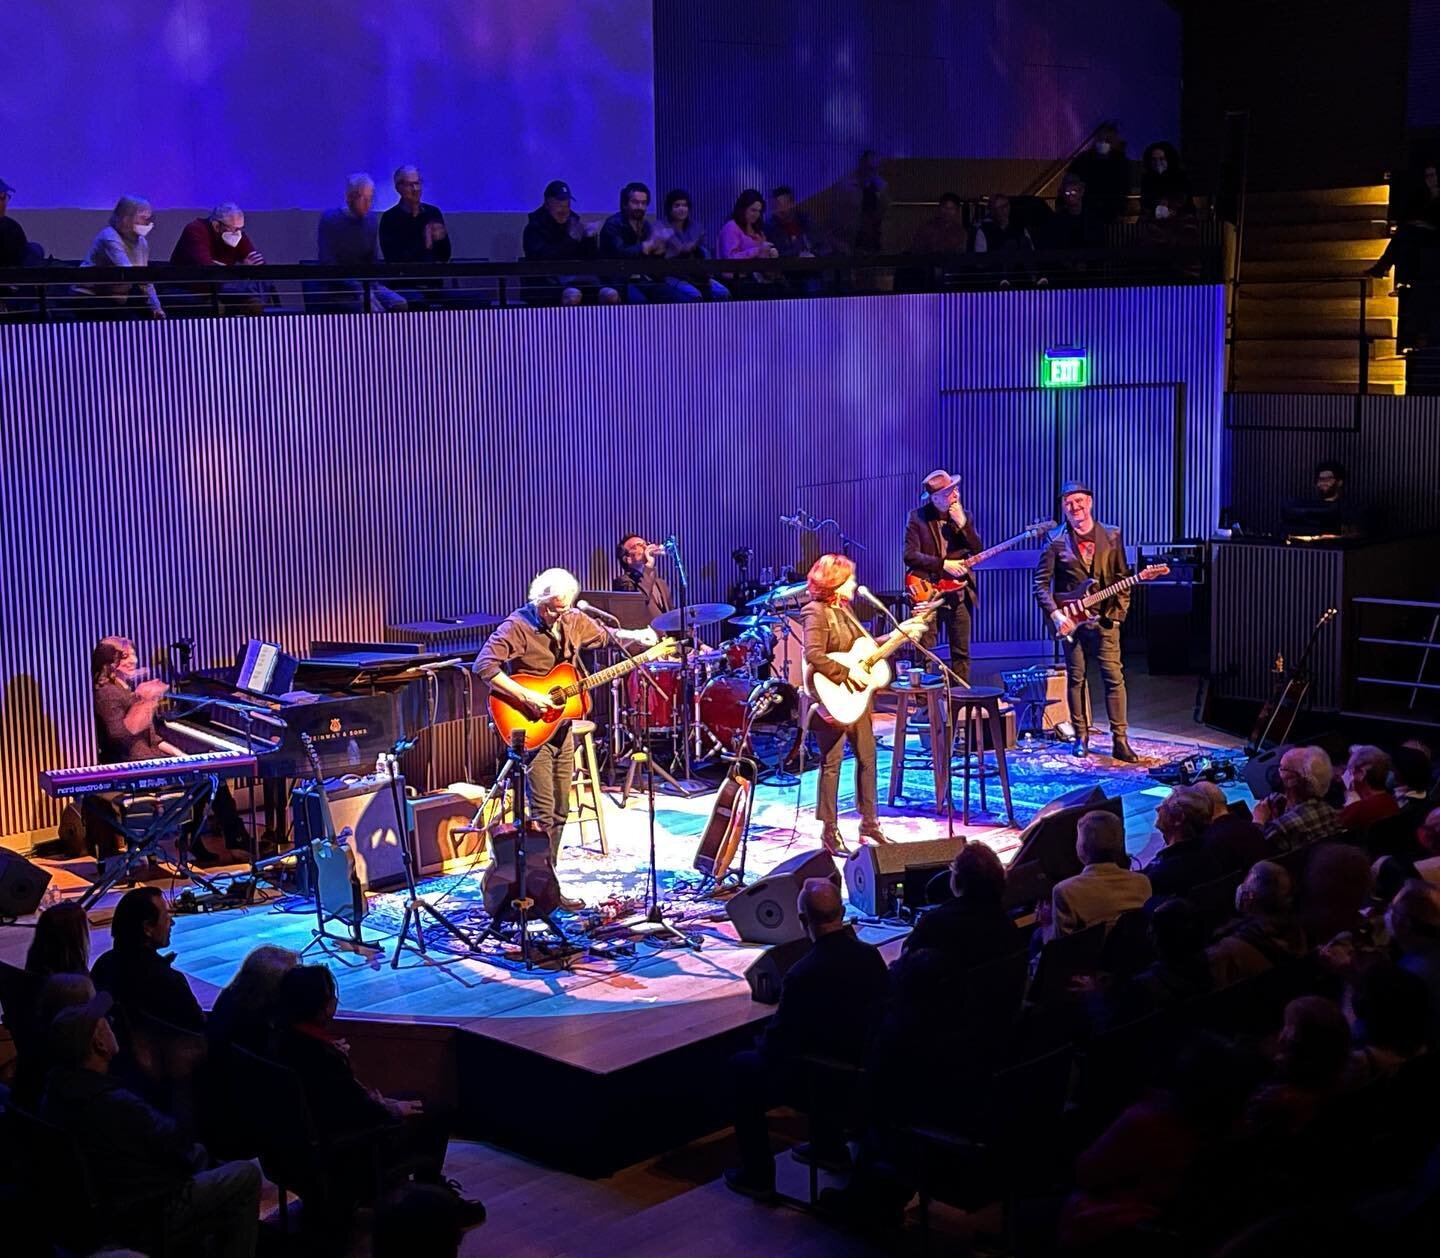 The @rosannecash show @sfjazz was exceptional.